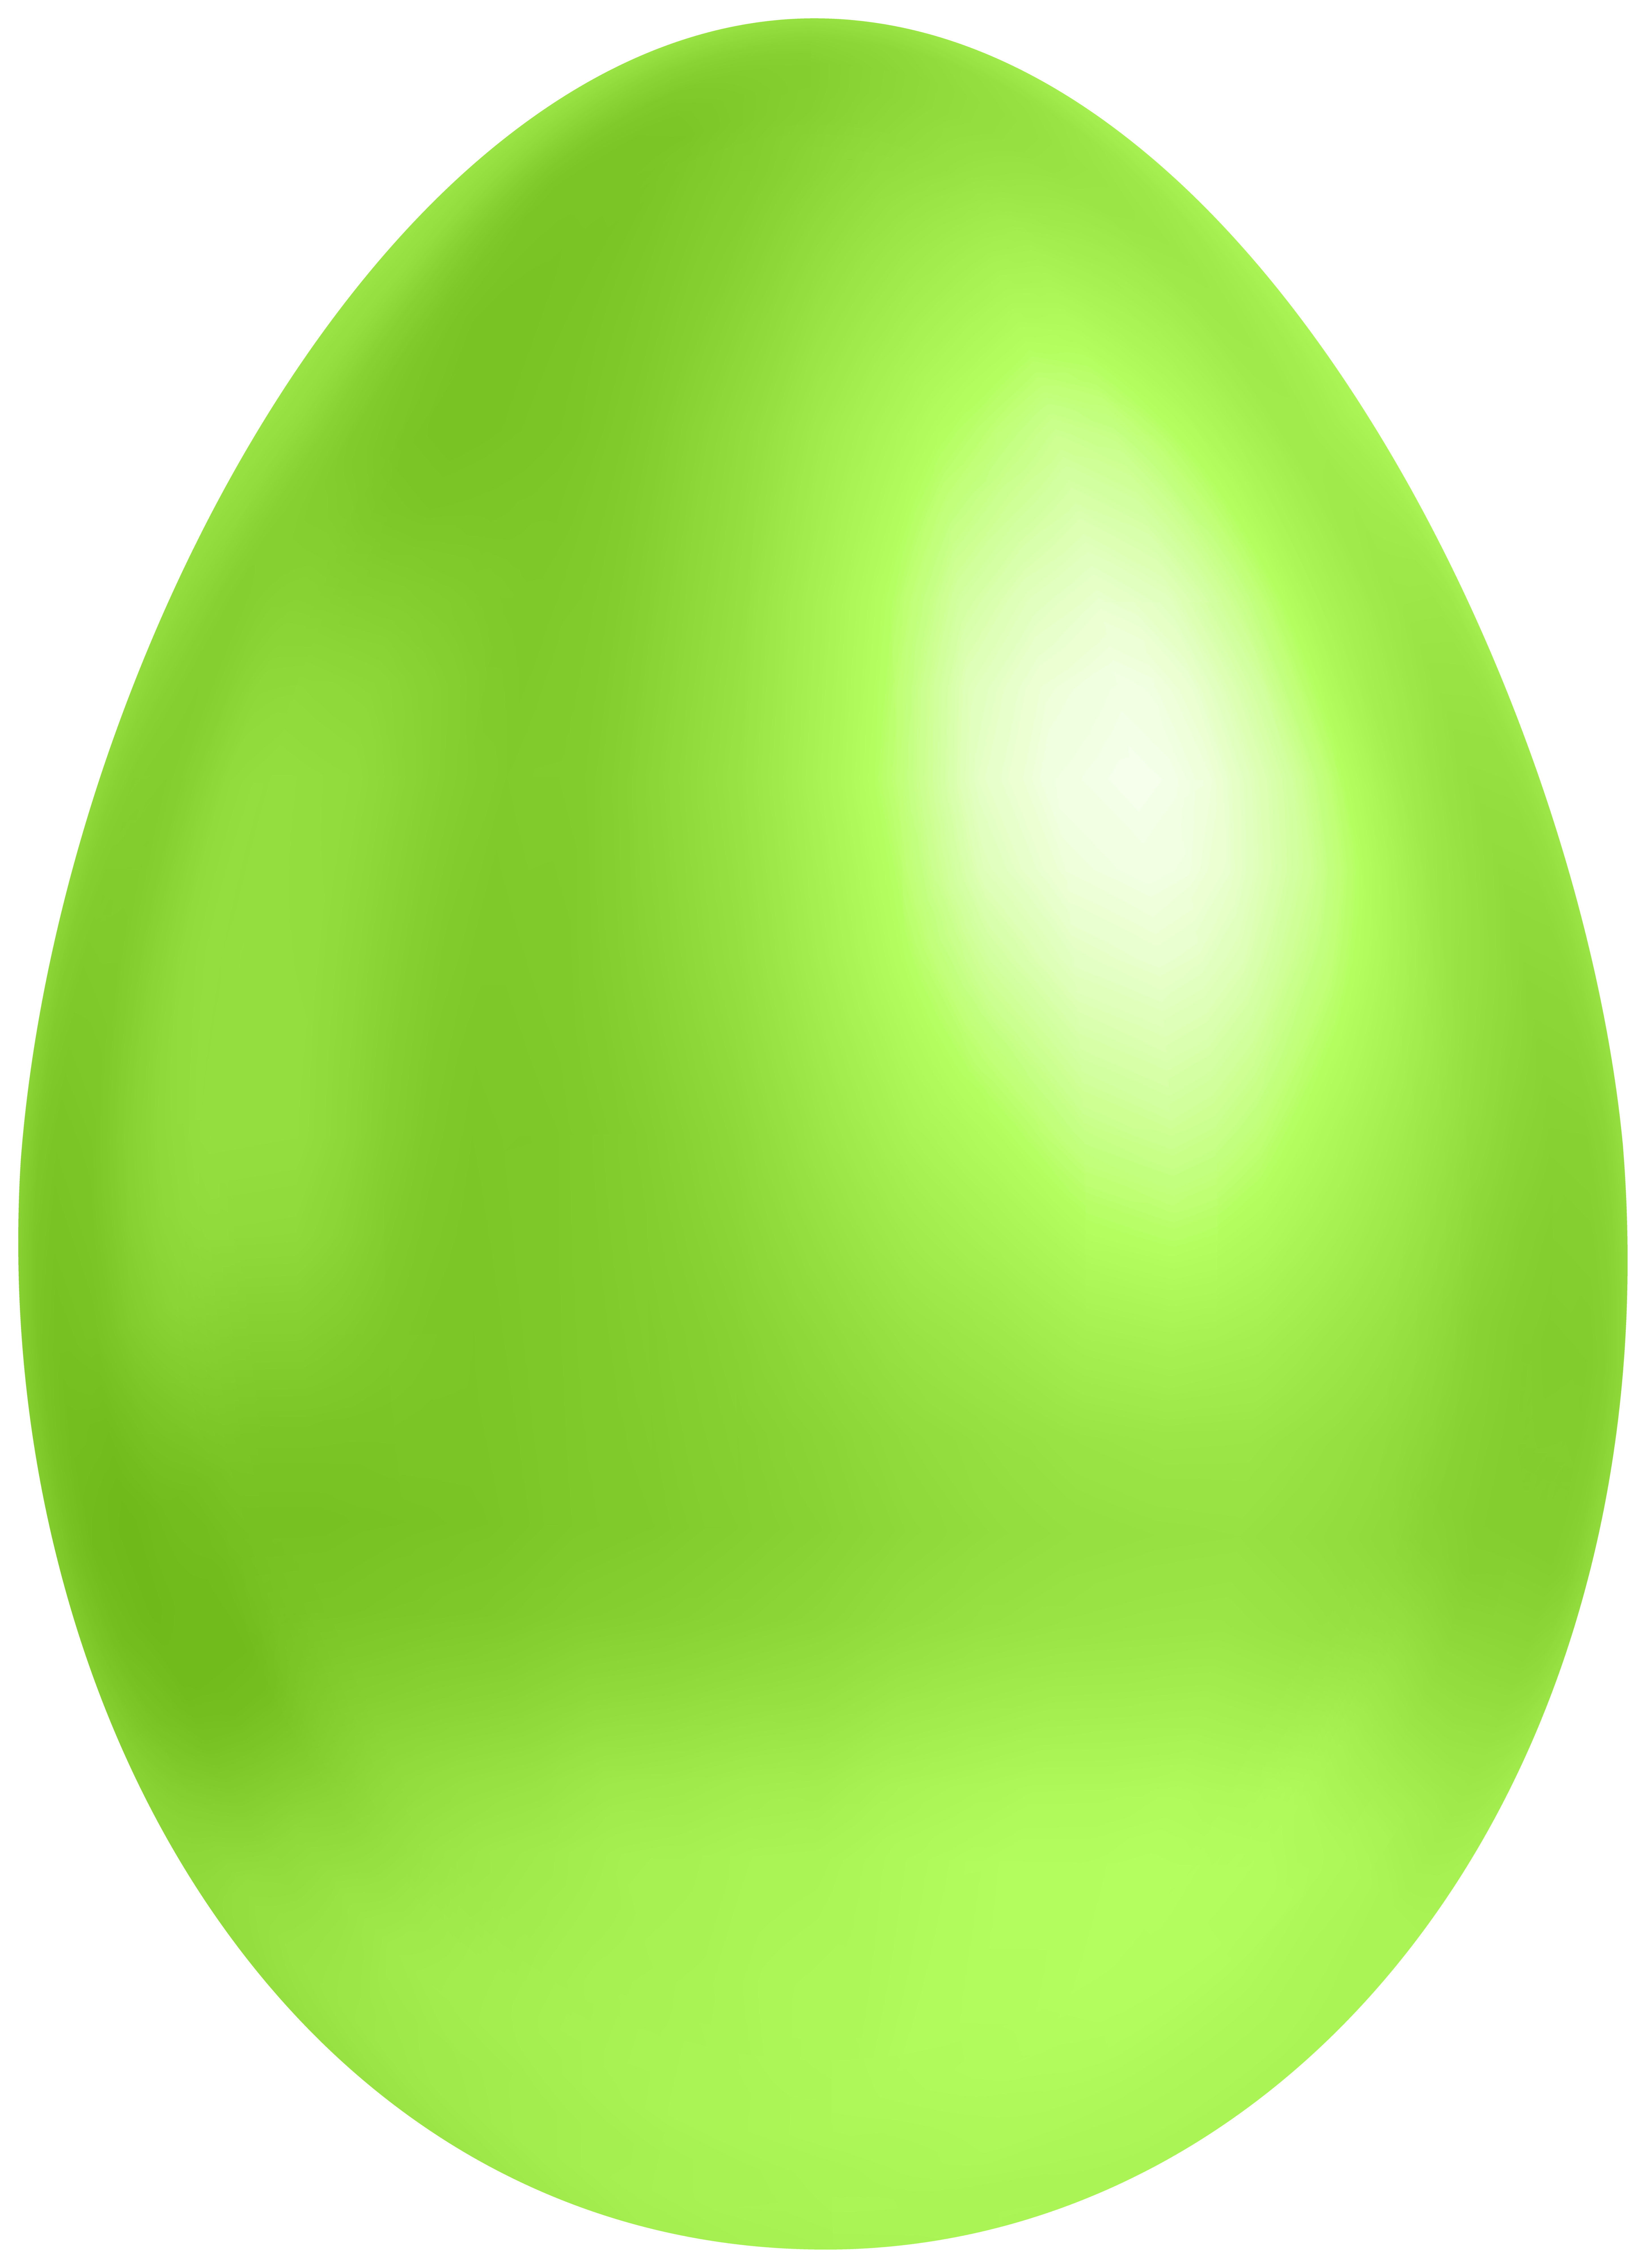 Green Easter Egg Transparent Png Clipart Gallery Yopriceville High Quality Images And Transparent Png Free Clipart